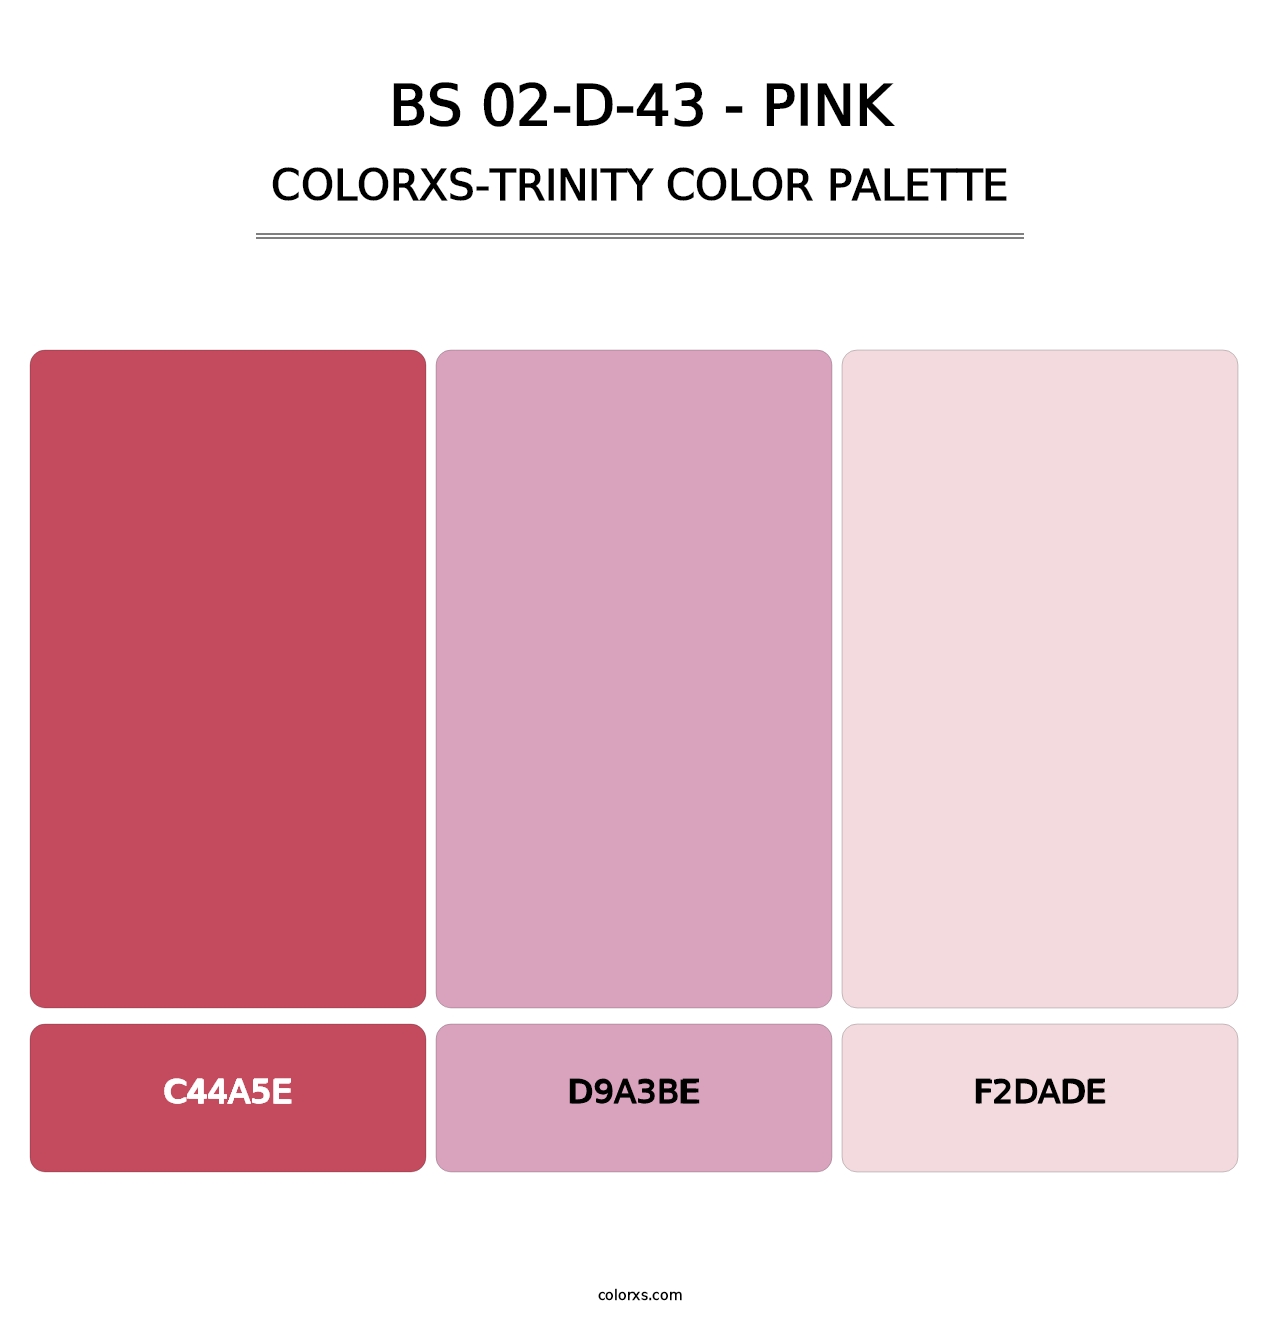 BS 02-D-43 - Pink - Colorxs Trinity Palette